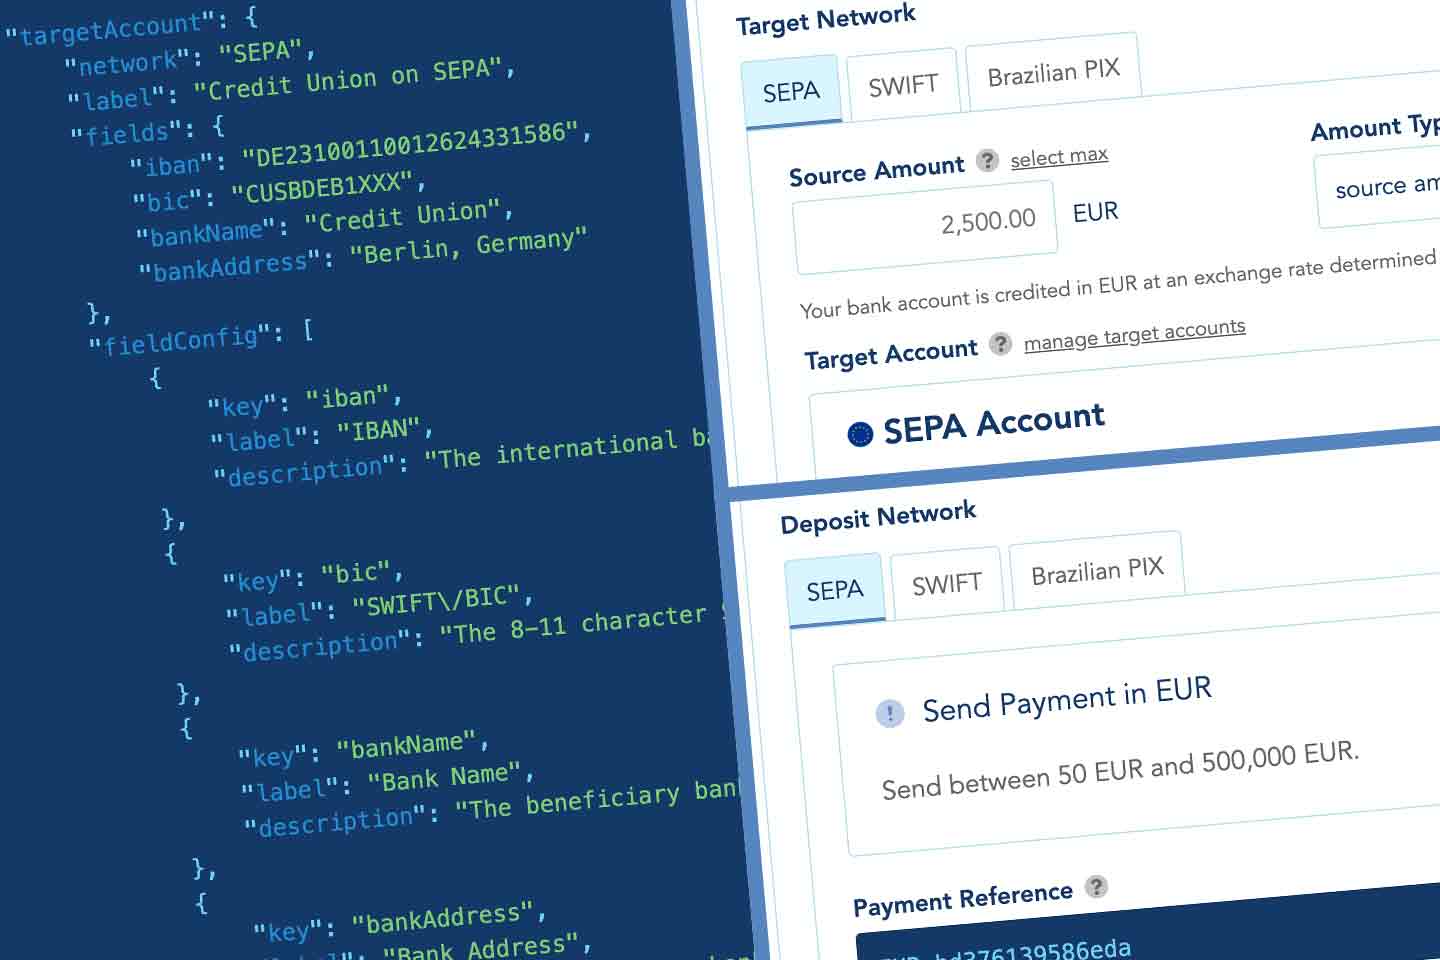 Easy connection and payouts to bank accounts for SWIFT and SEPA.